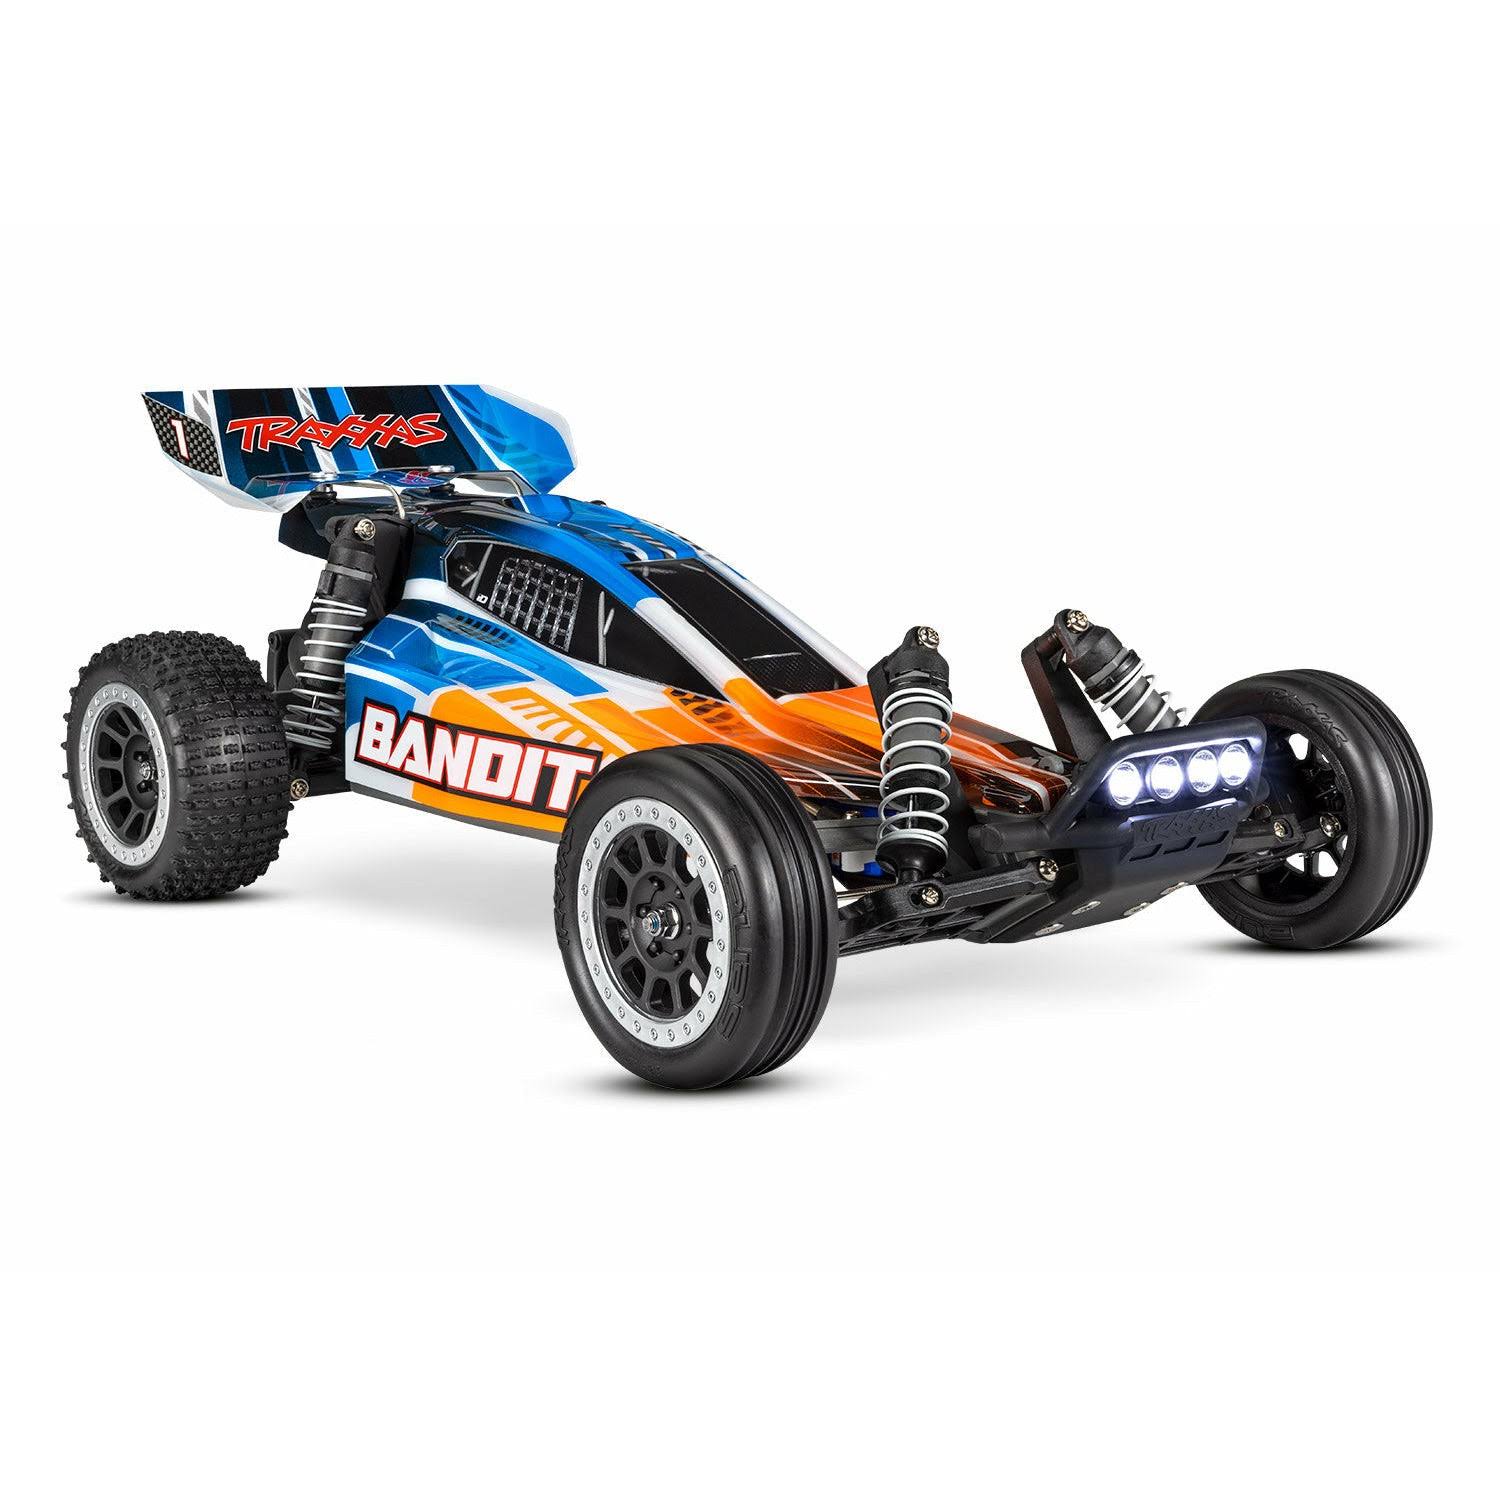 Traxxas Bandit 1/10 RTR 2WD Buggy w/LED Lights, Battery & DC Charger Orange